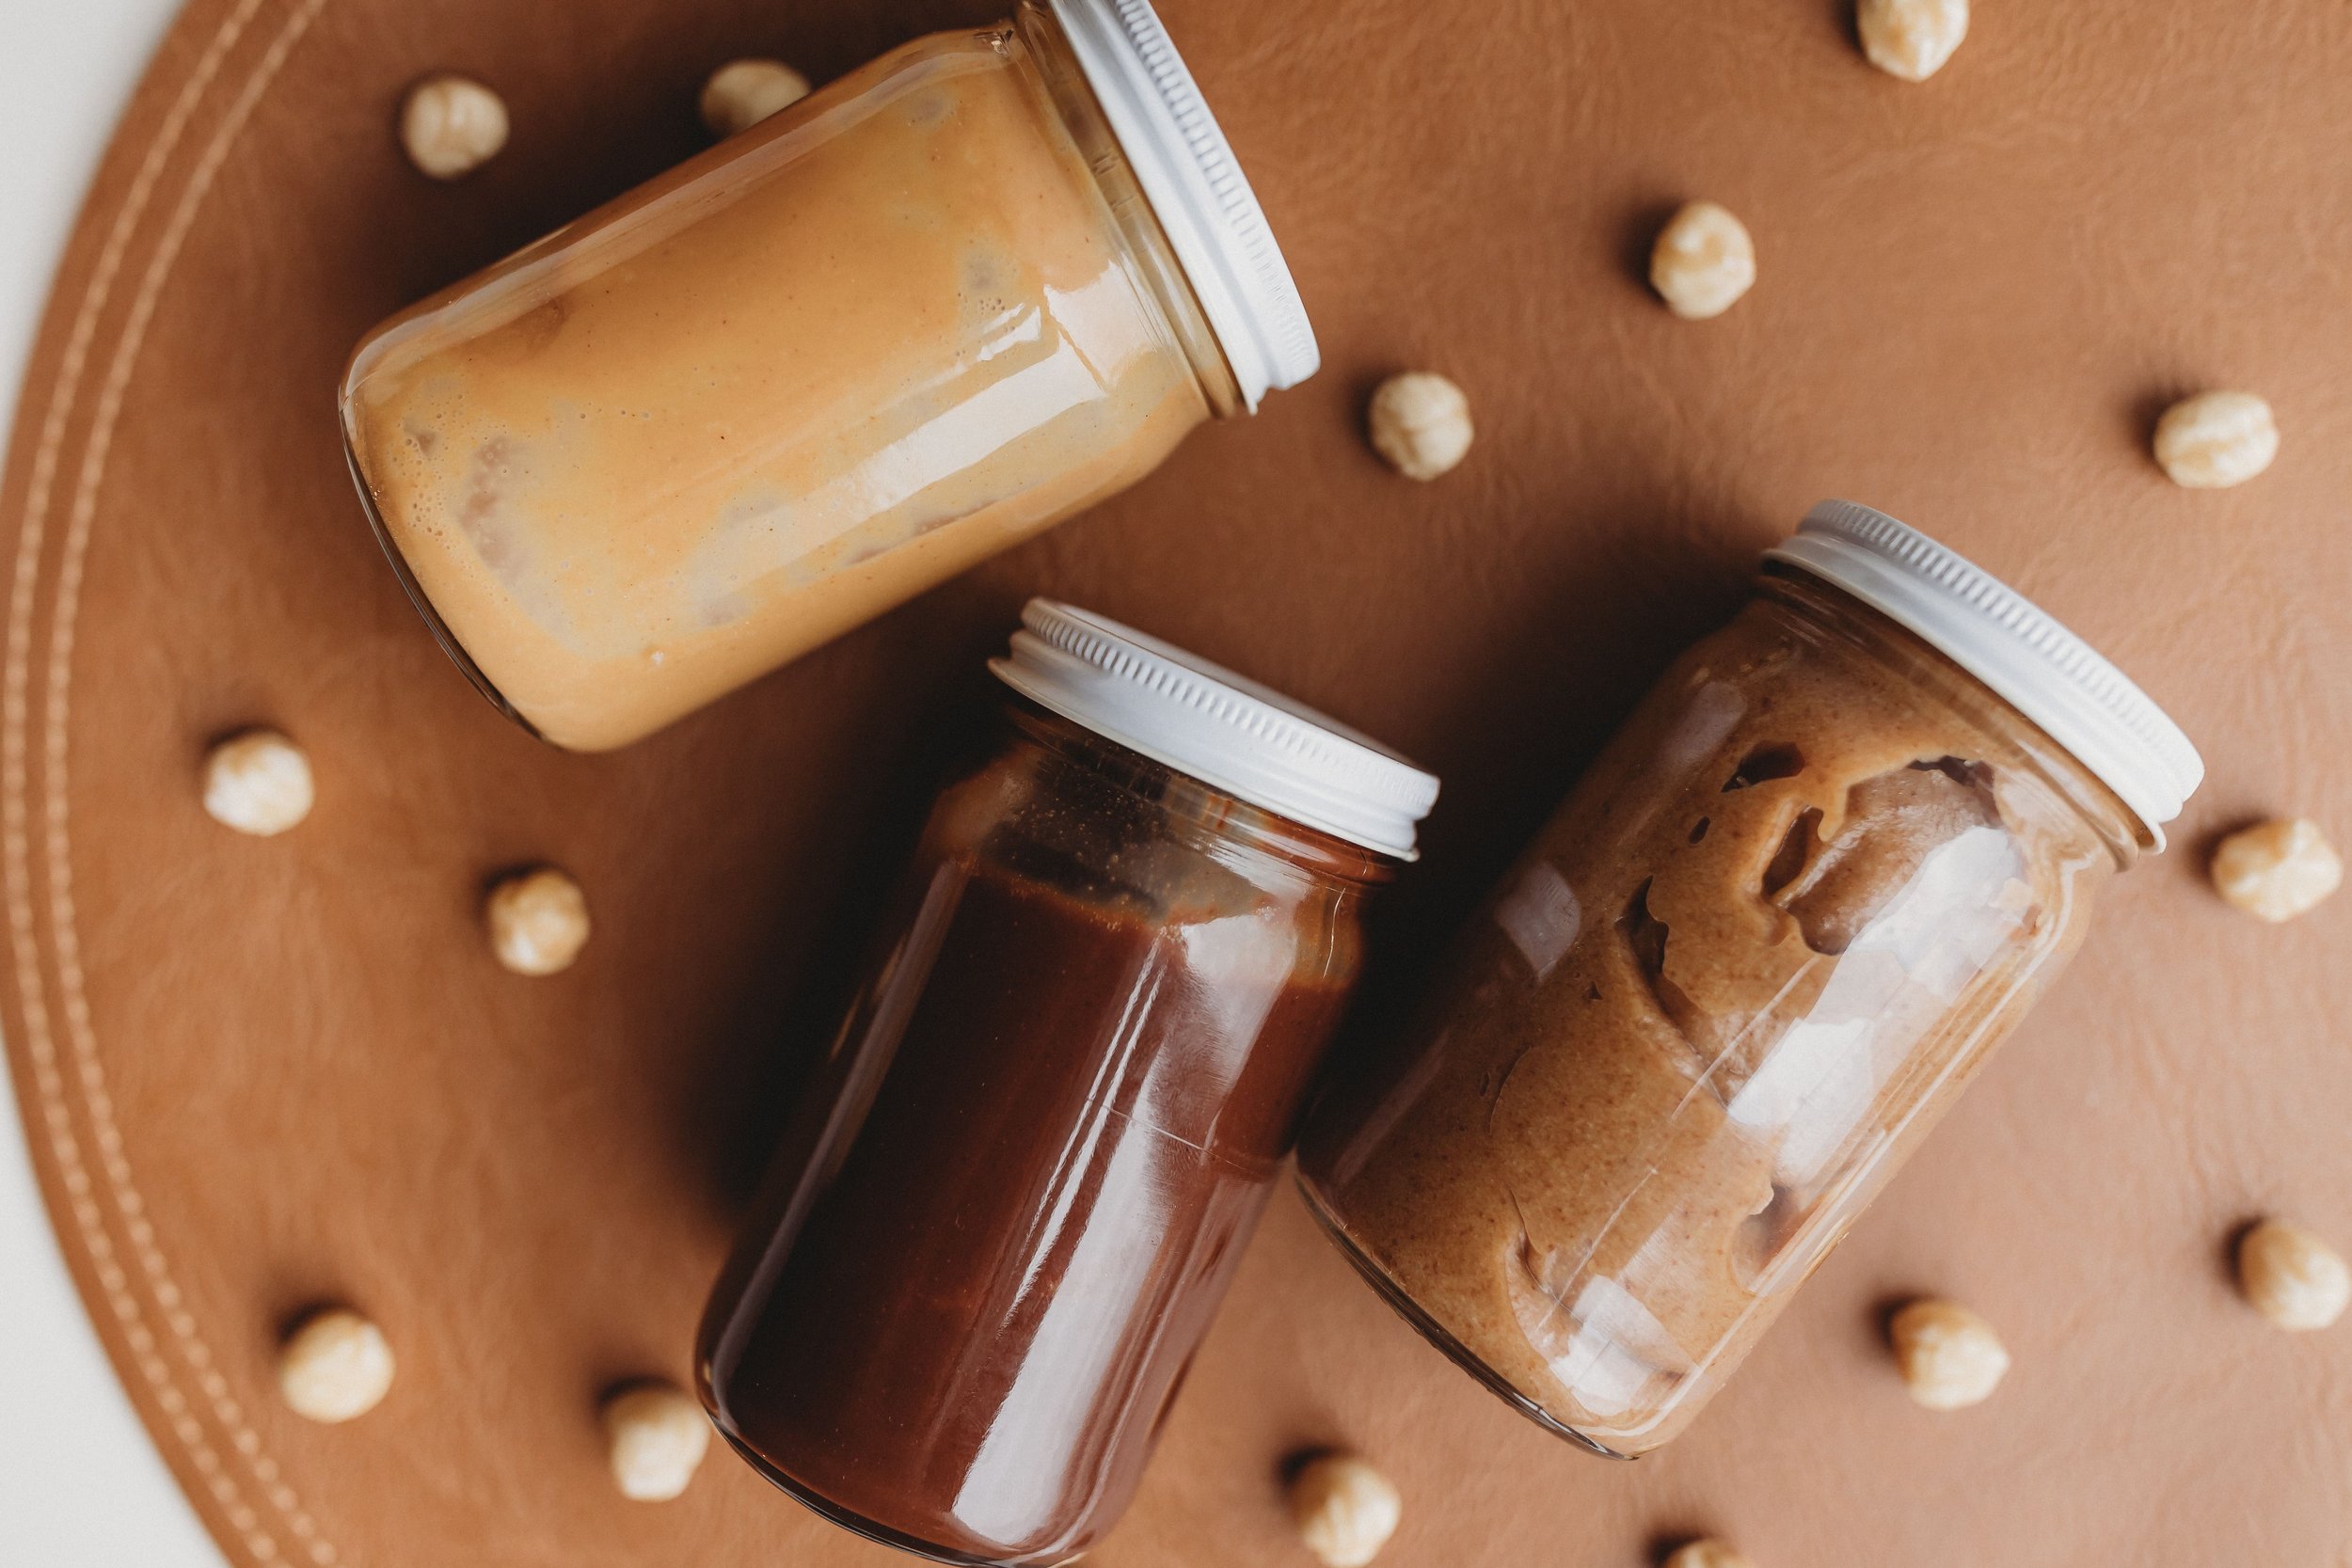  three jars of handmade spreads lay next to each other among hazelnuts 